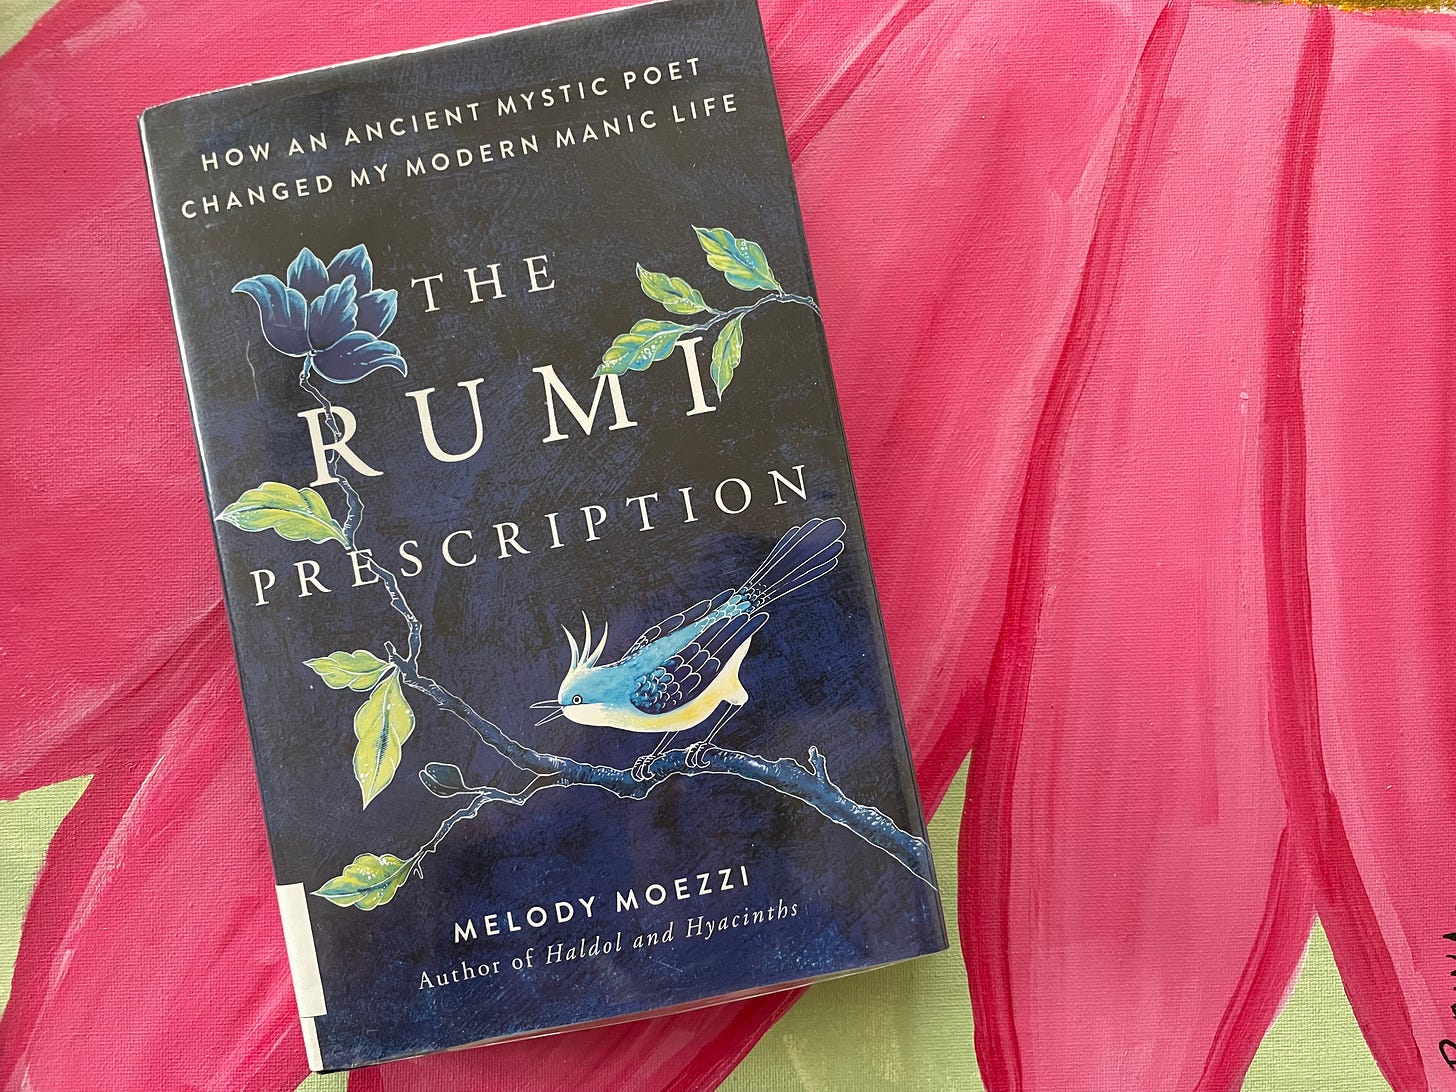 A copy of The Rumi Prescription, a dark blue book with hummingbirds, branches, leaves, and flowers on the cover. Behind the book is a hot pink painting of flower petals.